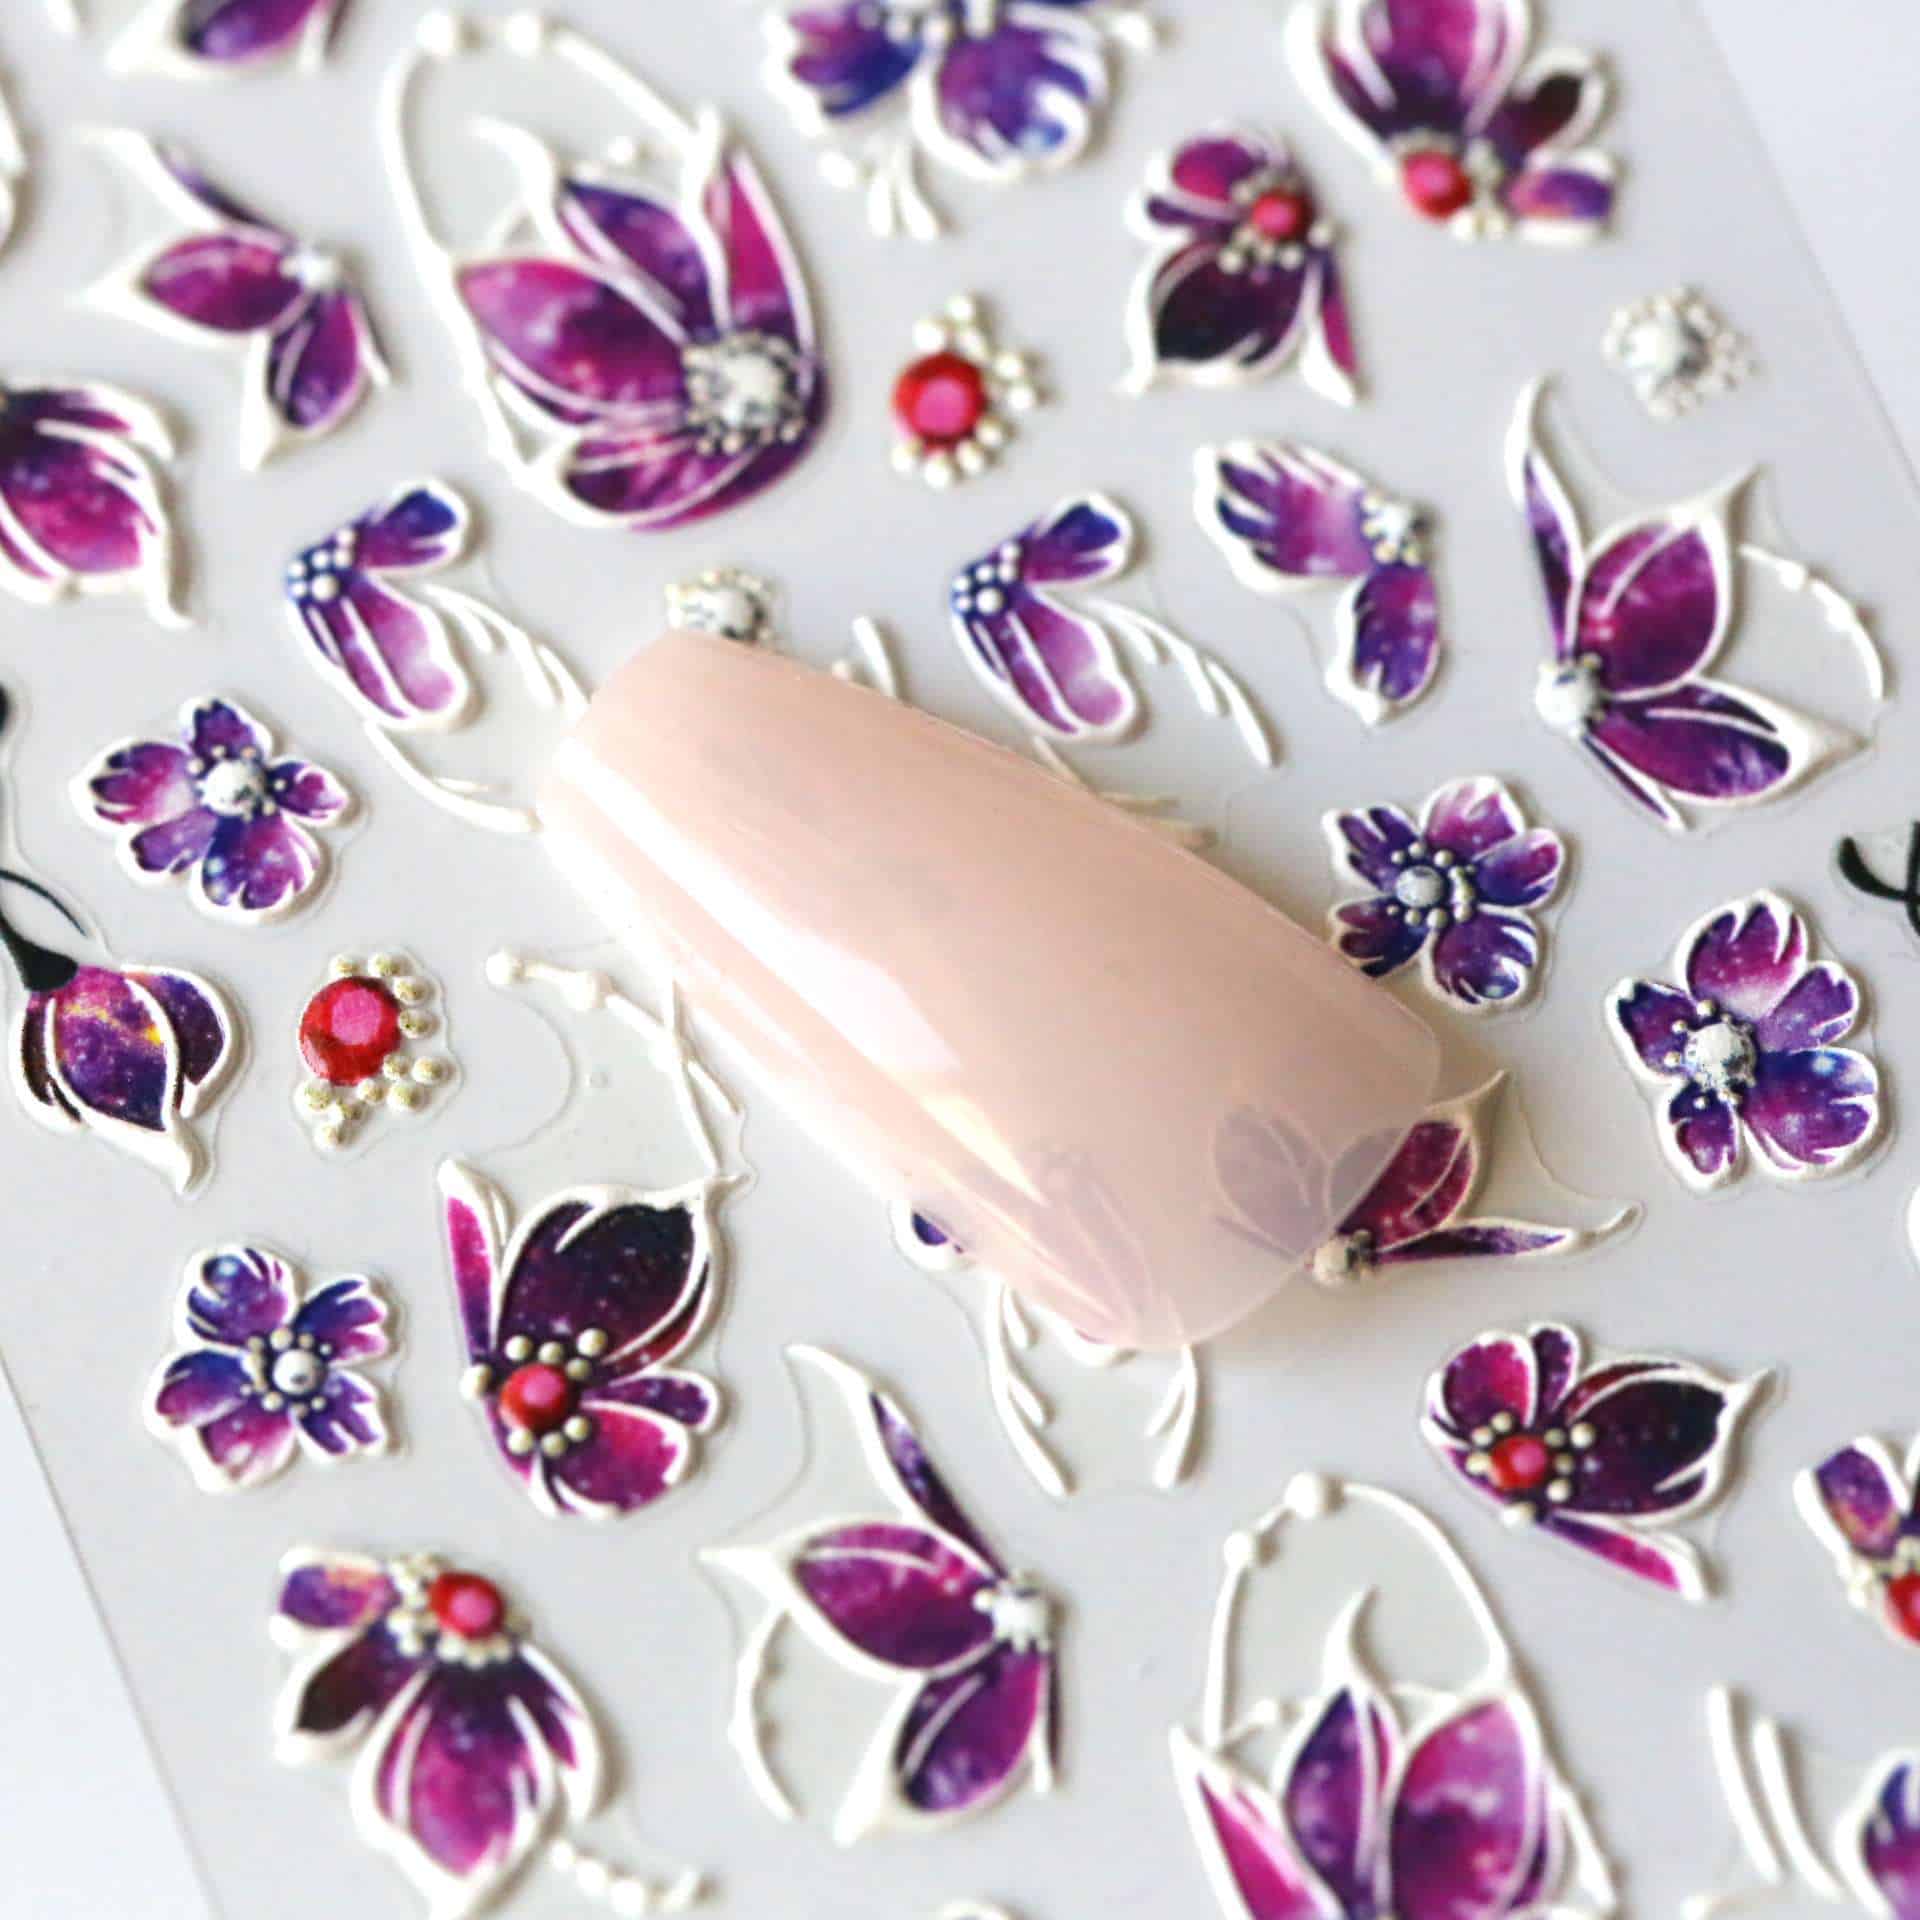 NAIL DECAL STICKERS 12